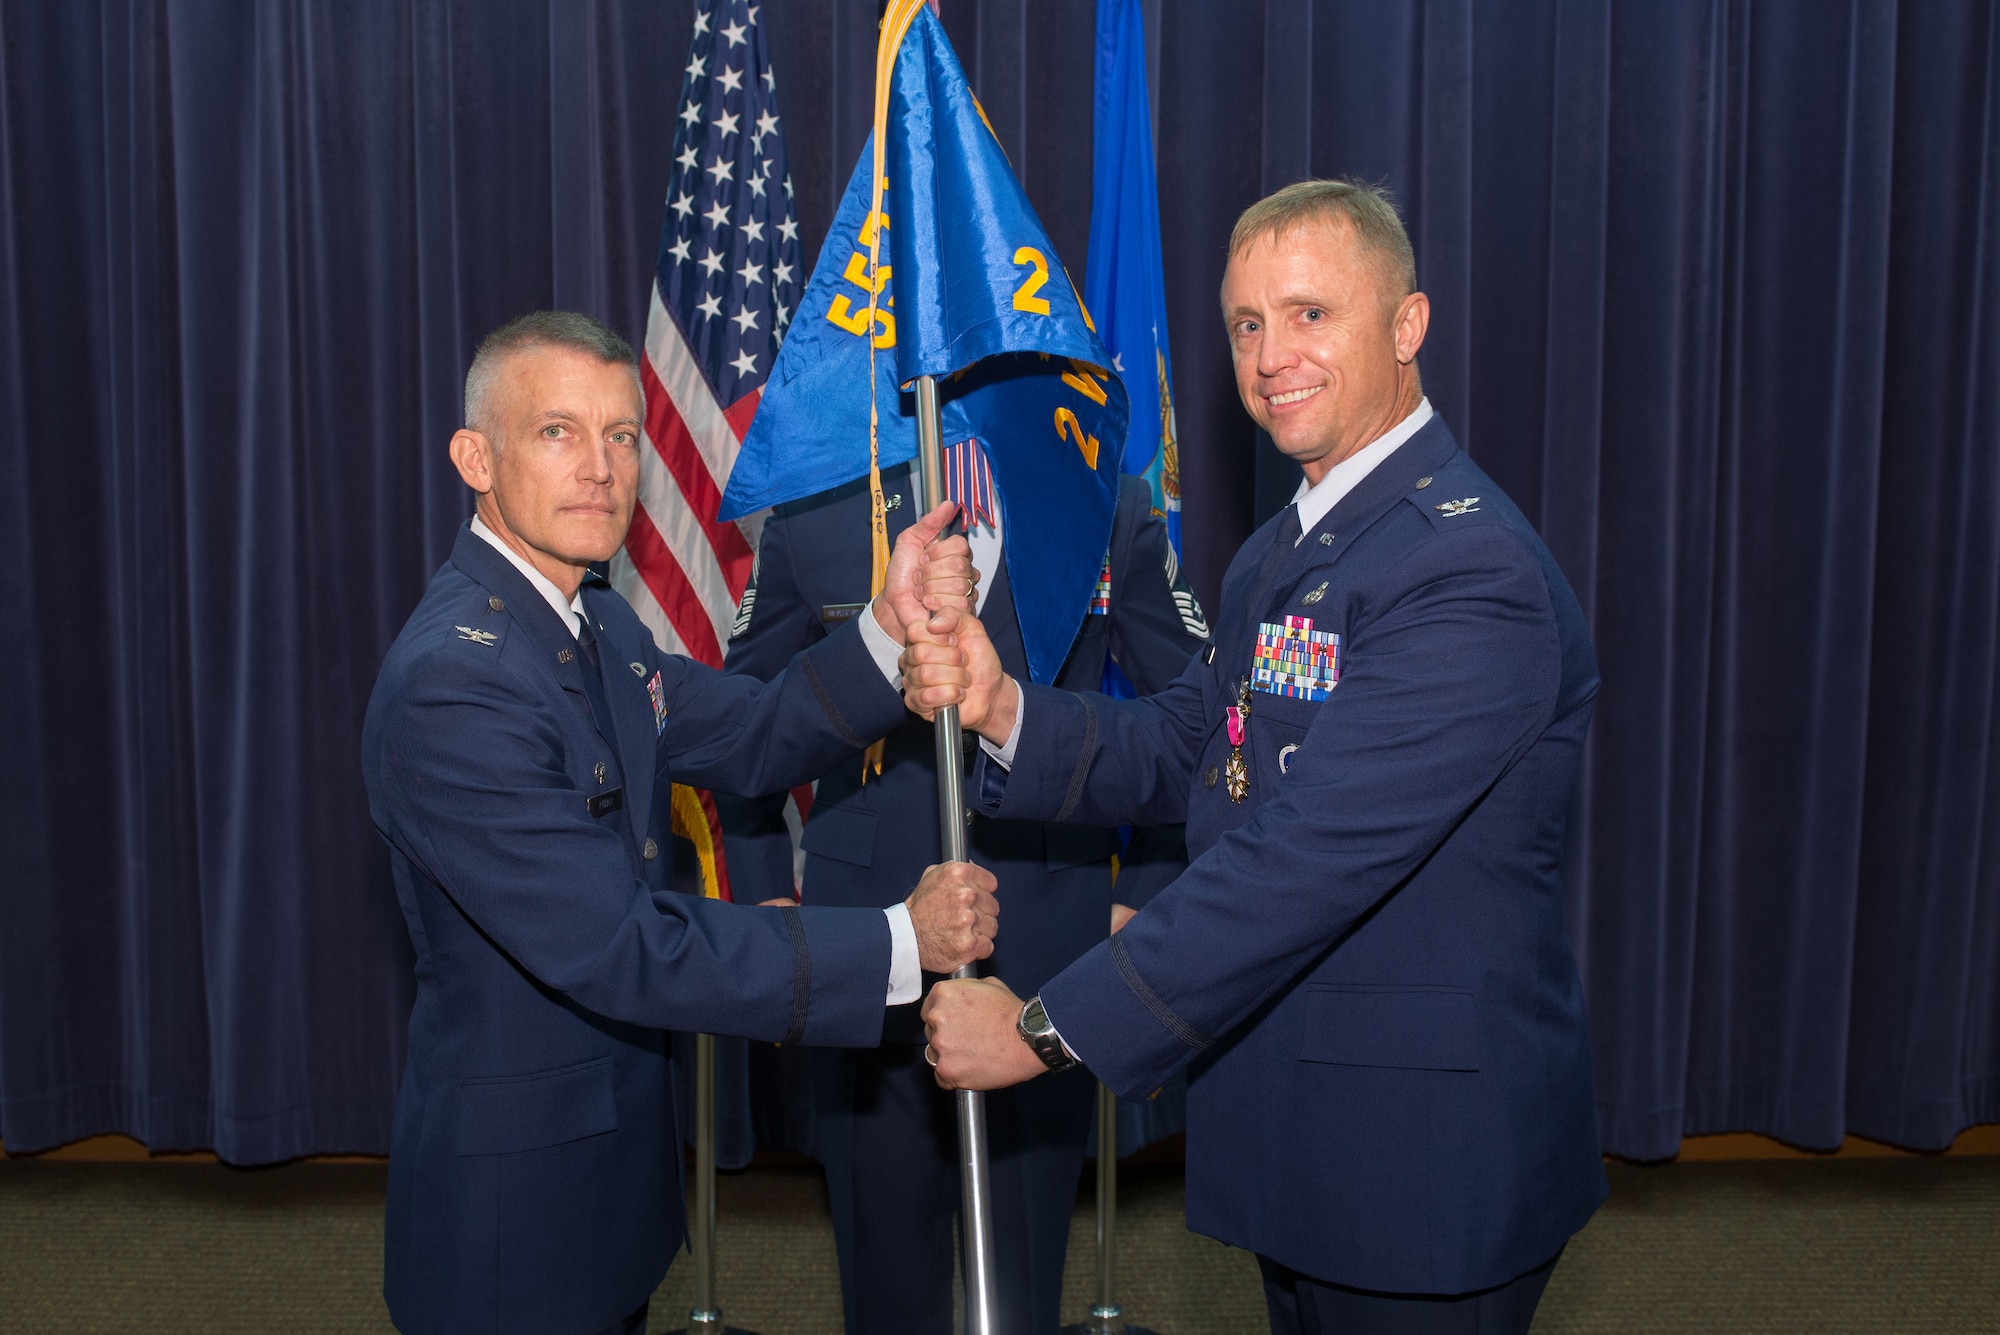 U.S. Air Force Col. Jason Patla, 2nd Weather Group (WXG) commander, relinquishes command of the 2nd WXG to U.S. Air Force Col. Brian Pukall, 557th Weather Wing commander, during a change of command ceremony July 11, 2018, at Offutt Air Force Base, Nebraska. Patla will go on to command Air Force Reserve Officer Training Corps Detachment 157 in Daytona Beach, Florida. (U.S. Air Force photo by Paul Shirk)